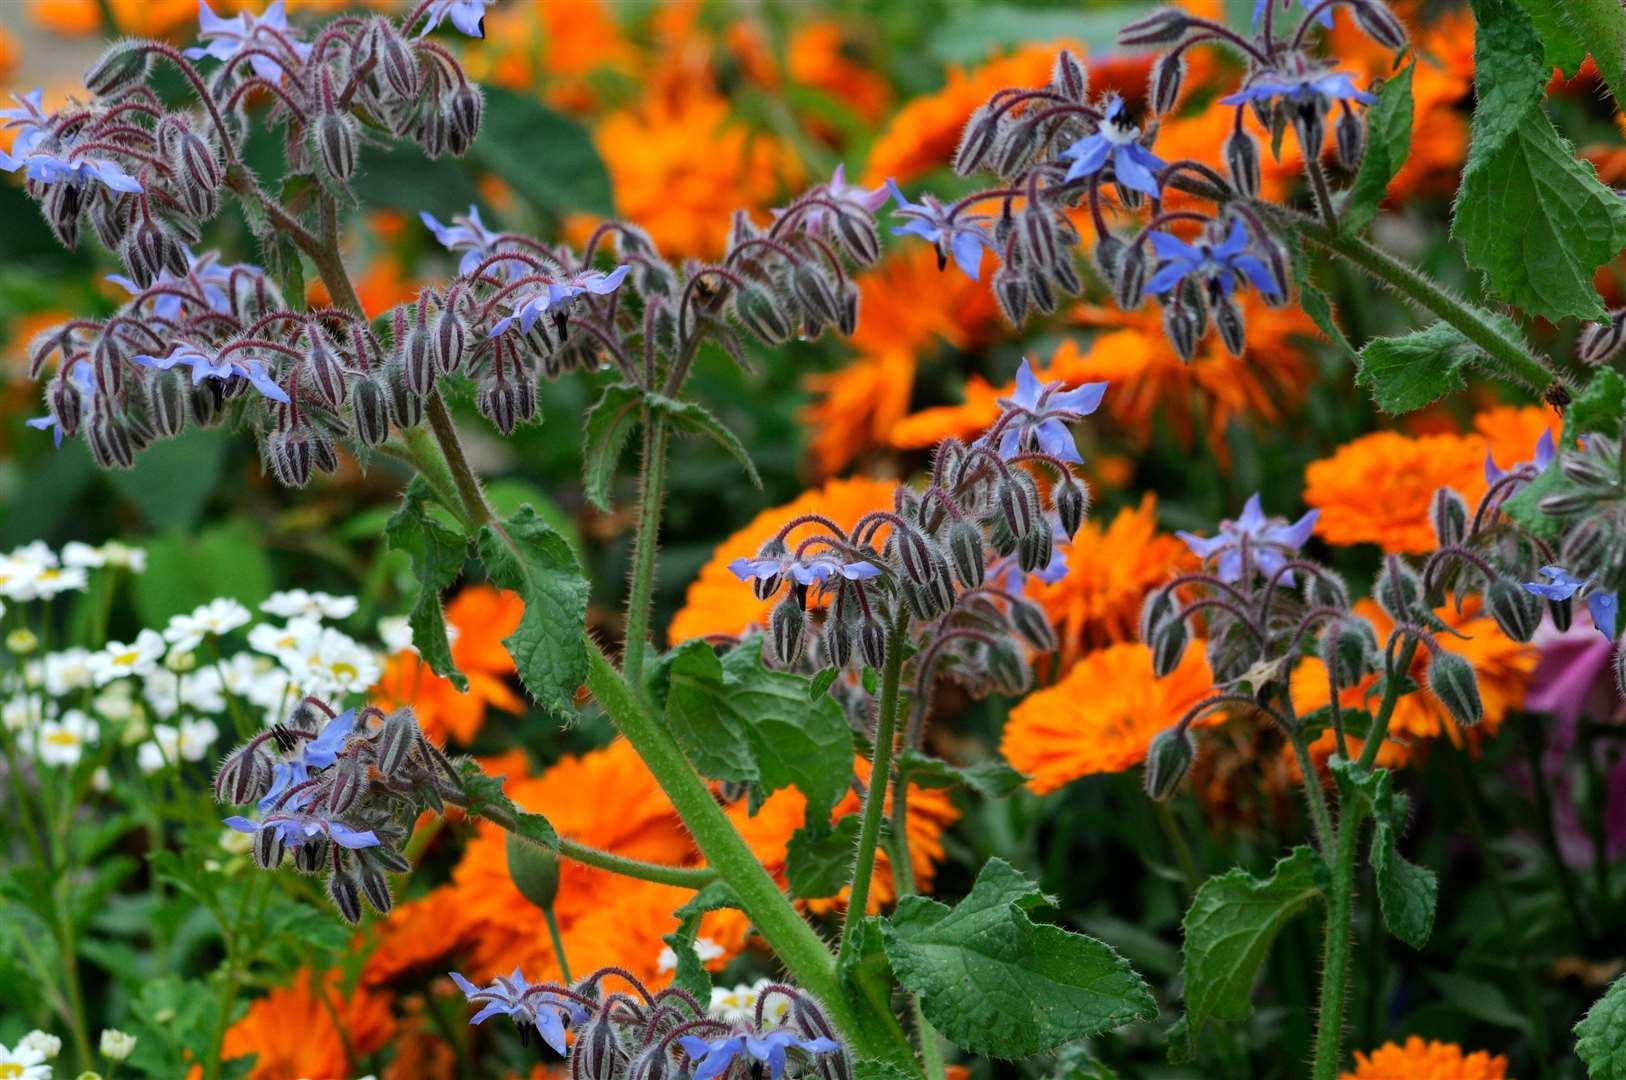 Borage planted with pot marigolds in a herb garden. Picture: Tim Sandall/RHS/PA